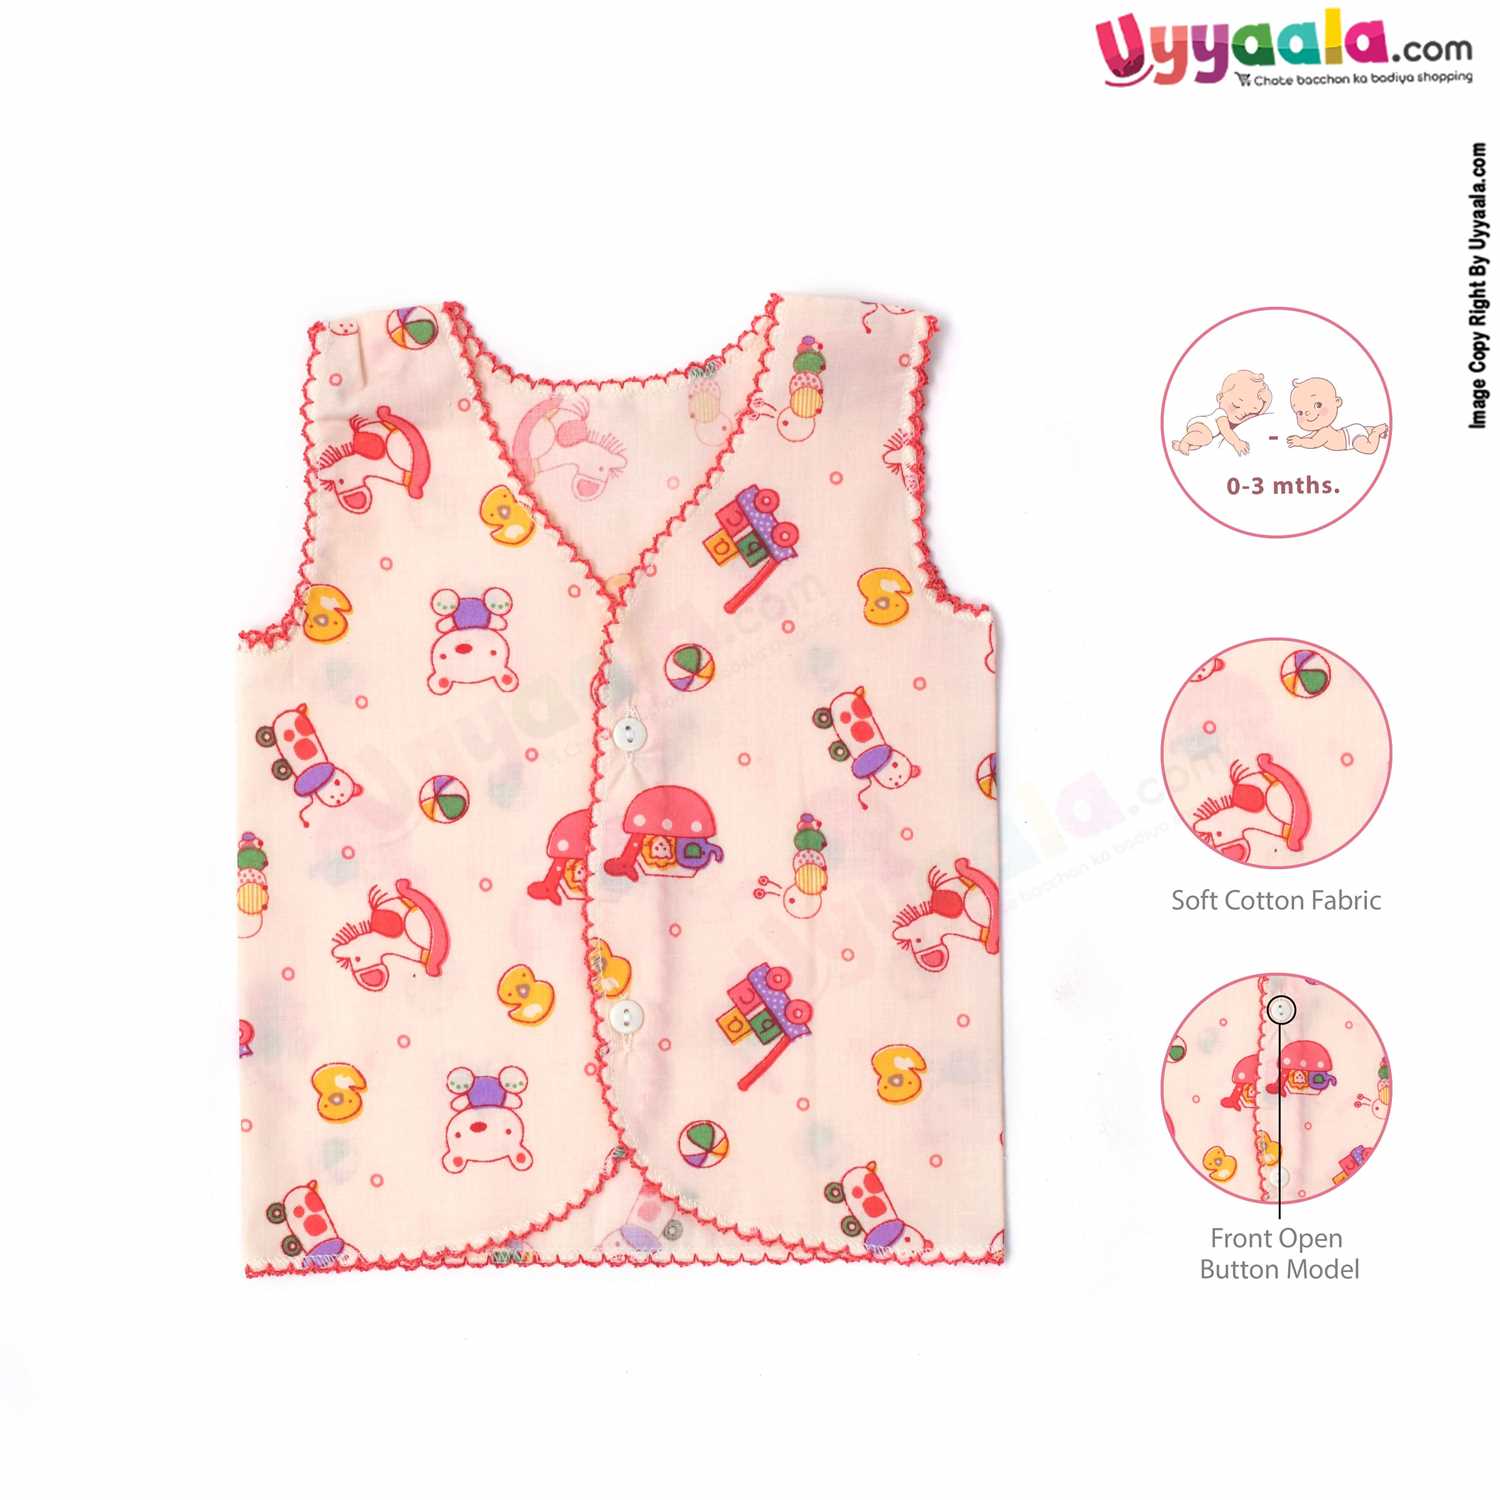 POLAR CUBS Sleeveless Baby Jabla Set, Front Opening Button Model, Premium Quality Cotton Baby Wear, Assorted Prints, (0-3M), 5Pack - Multicolor